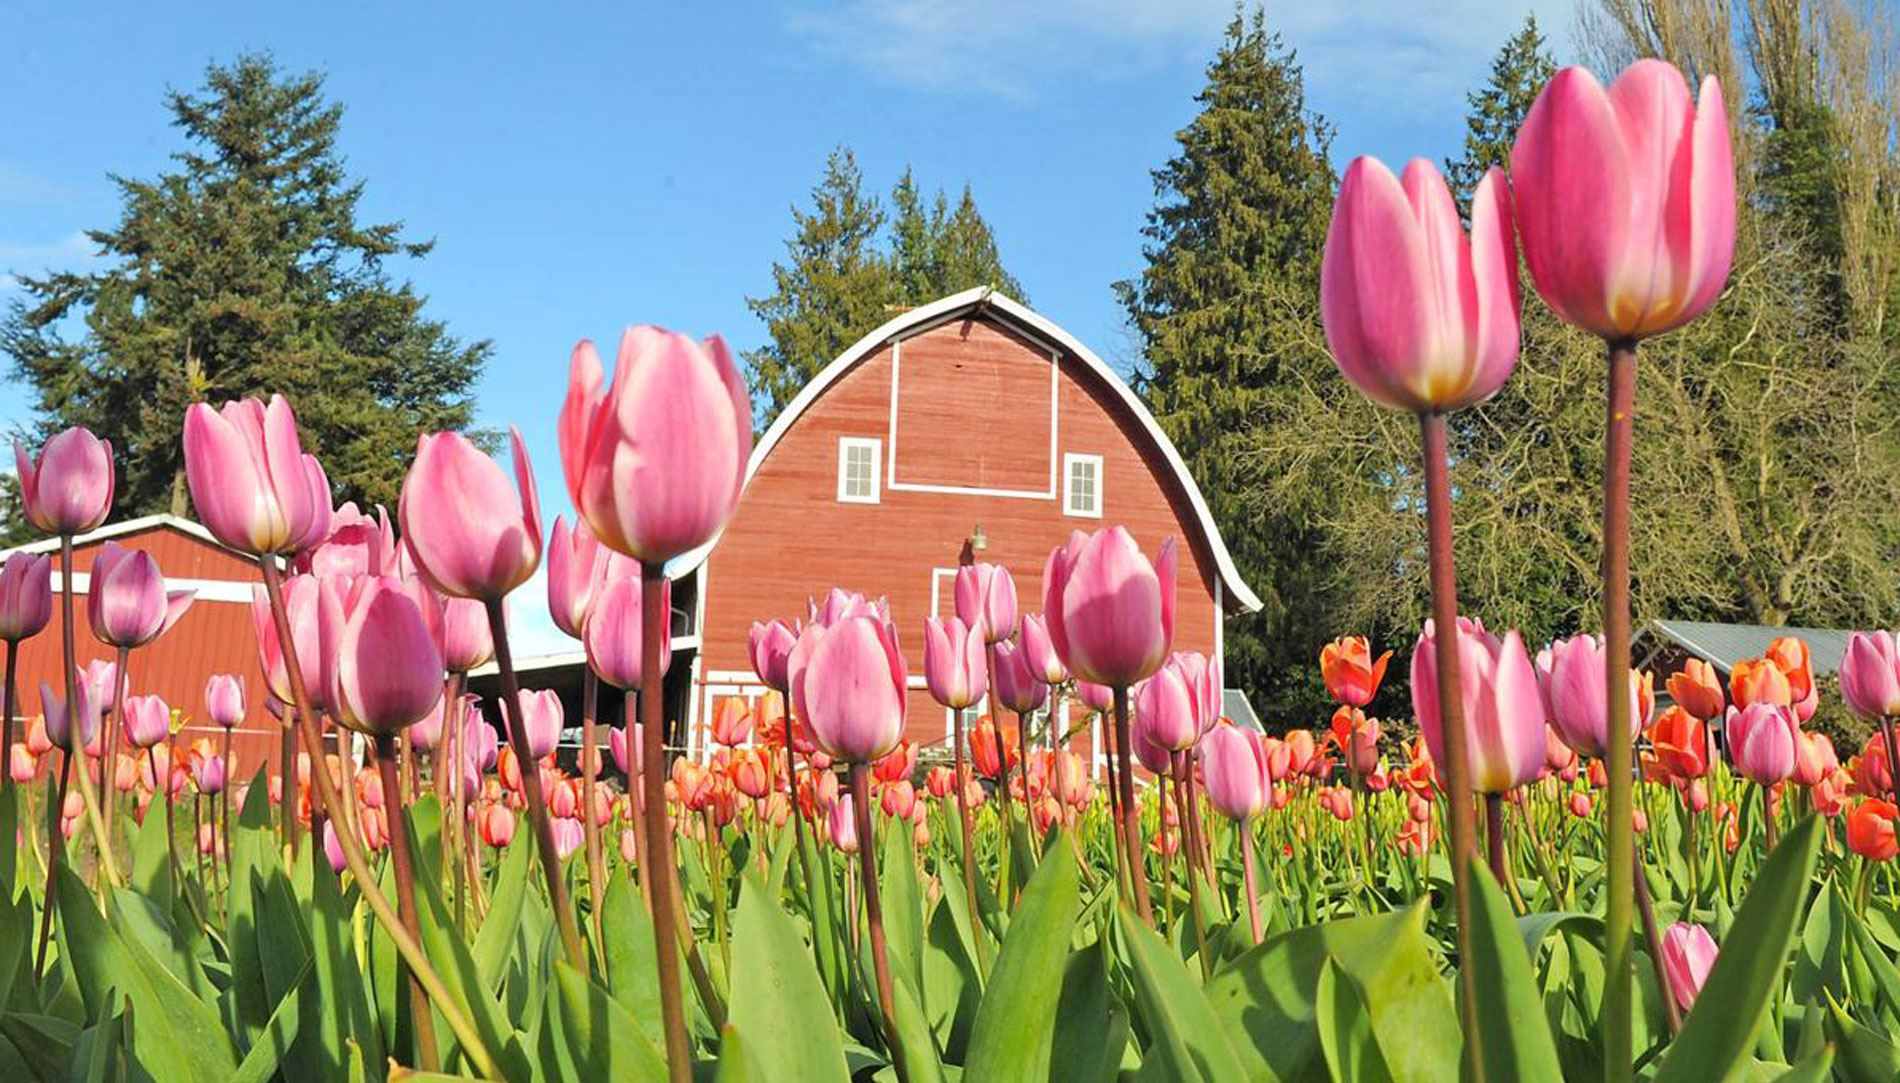 Pink tulips bloom in front of a red barn